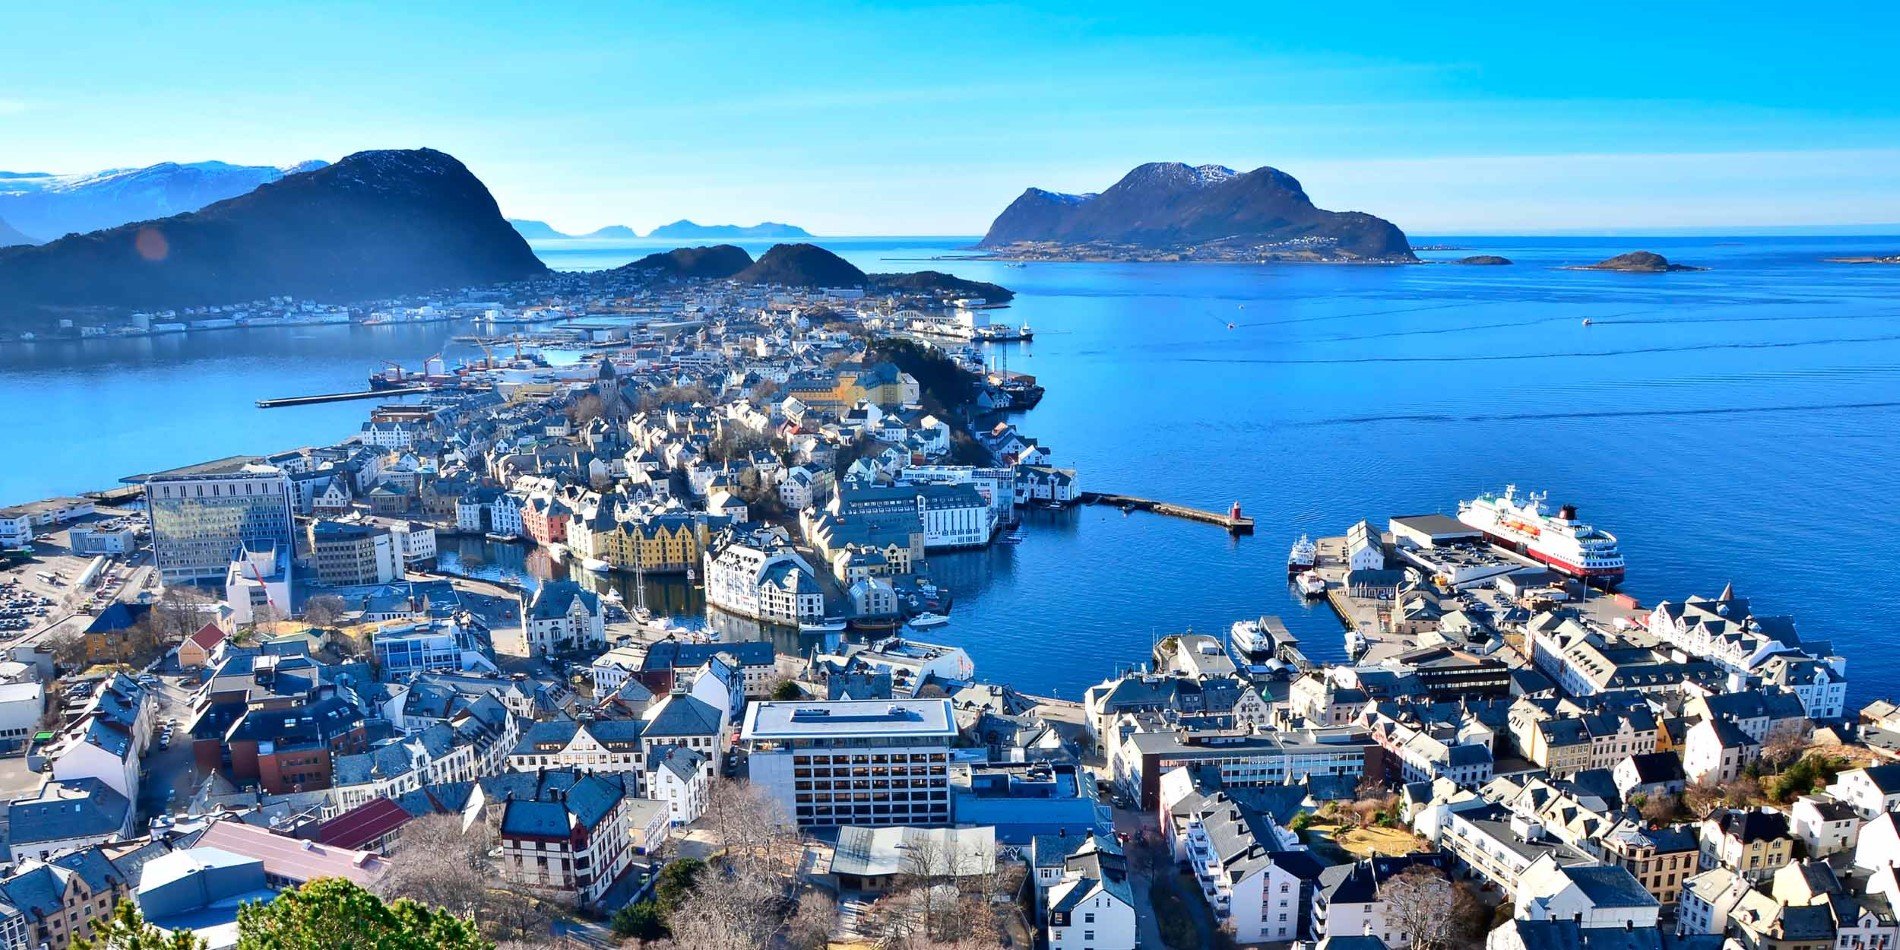 The view of Aalesund from Mount Aksla